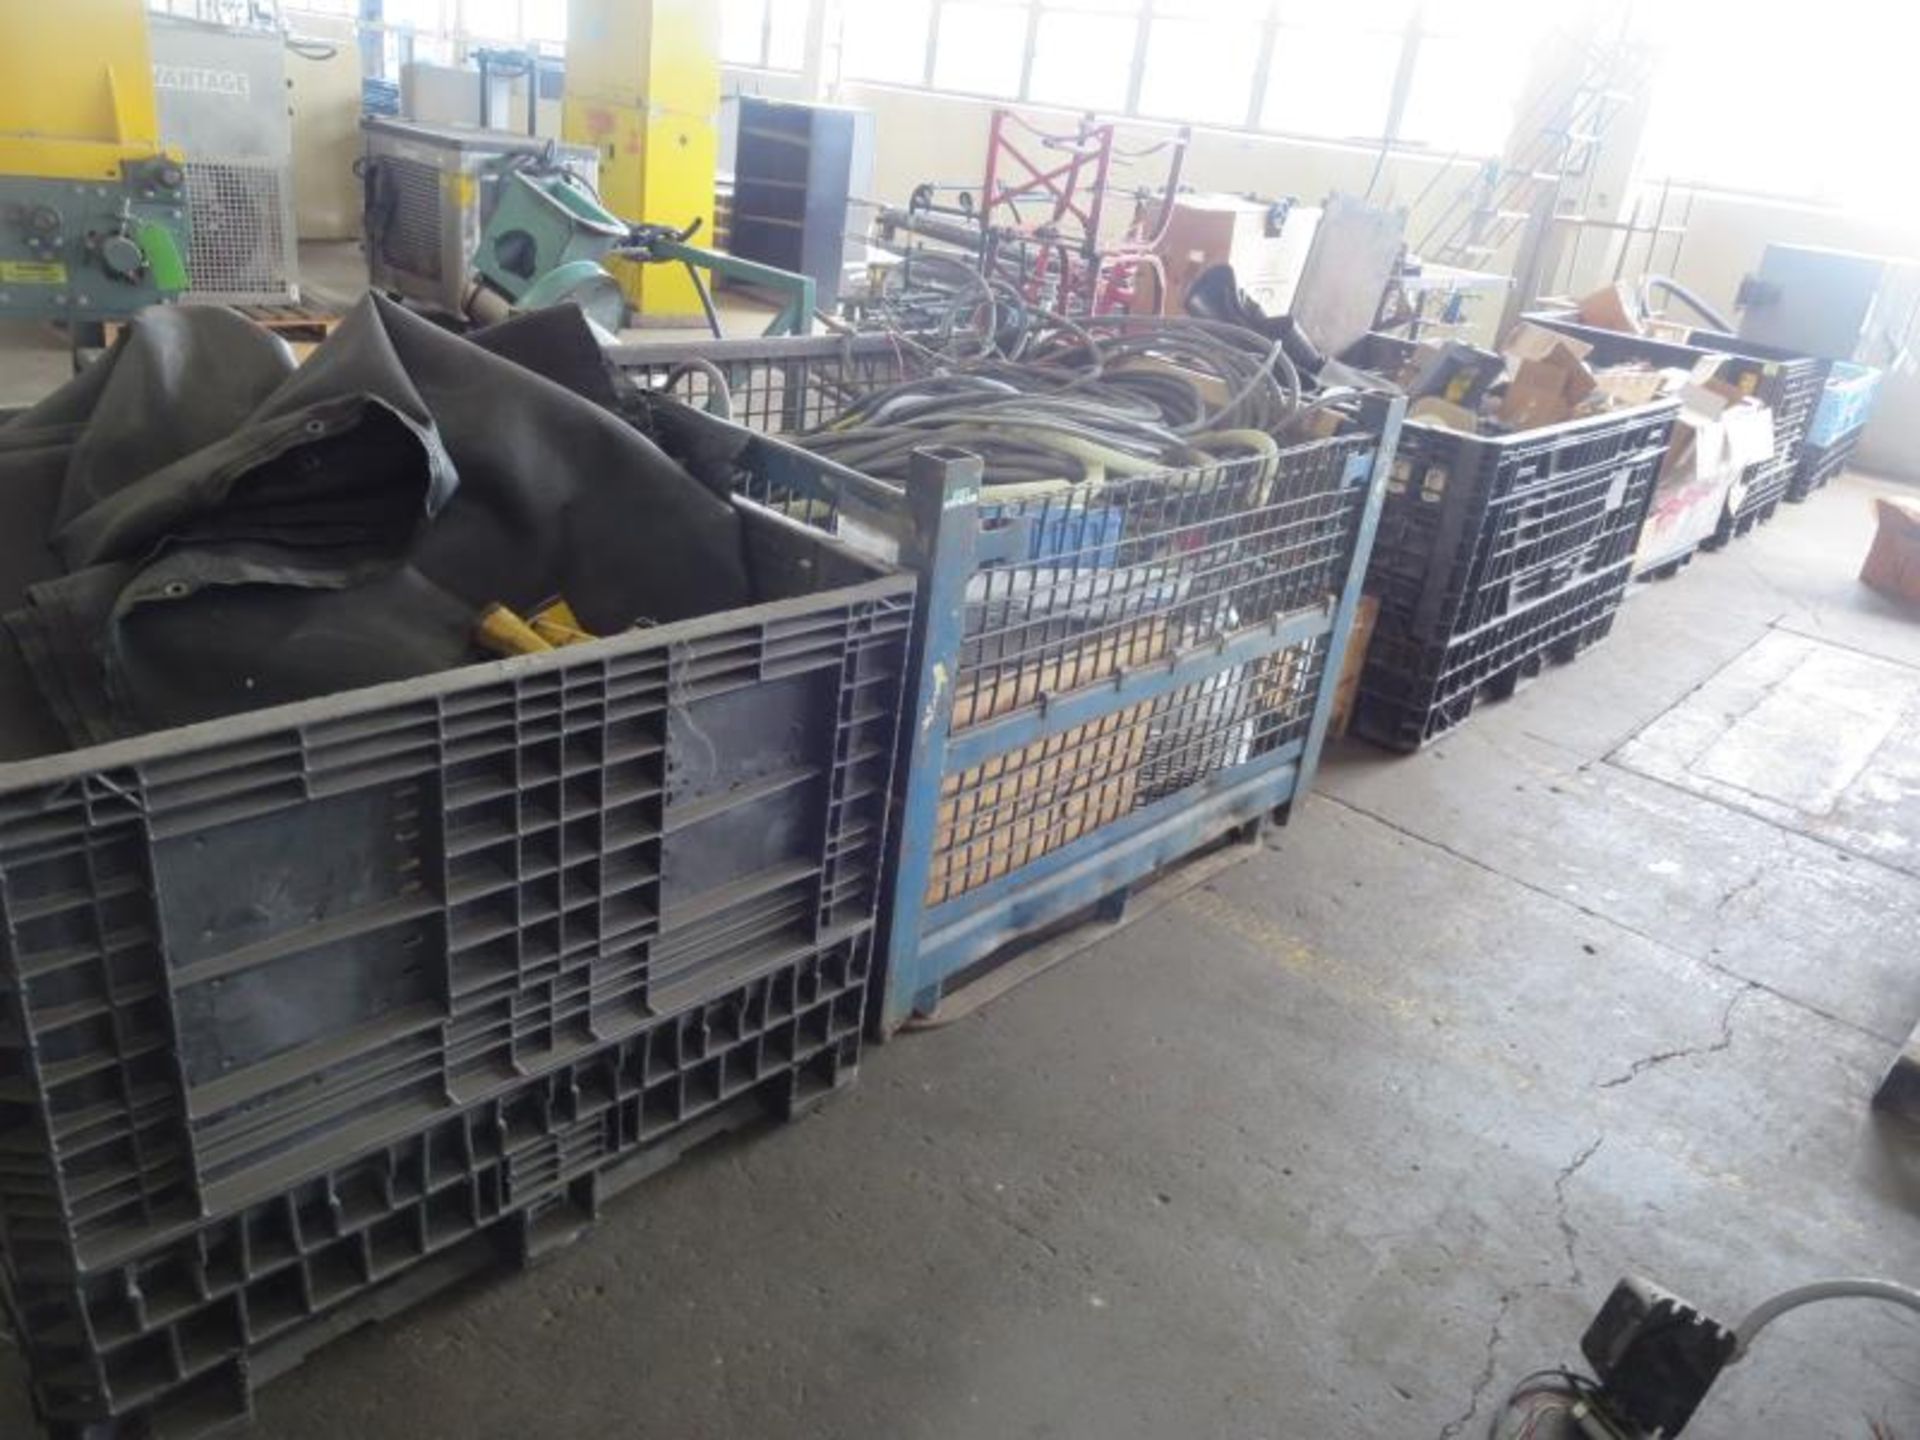 Lot (Qty 5 Skids) Consisting of pipe fittings, Electrical cords, Industrial Lights, Gear box, heavy